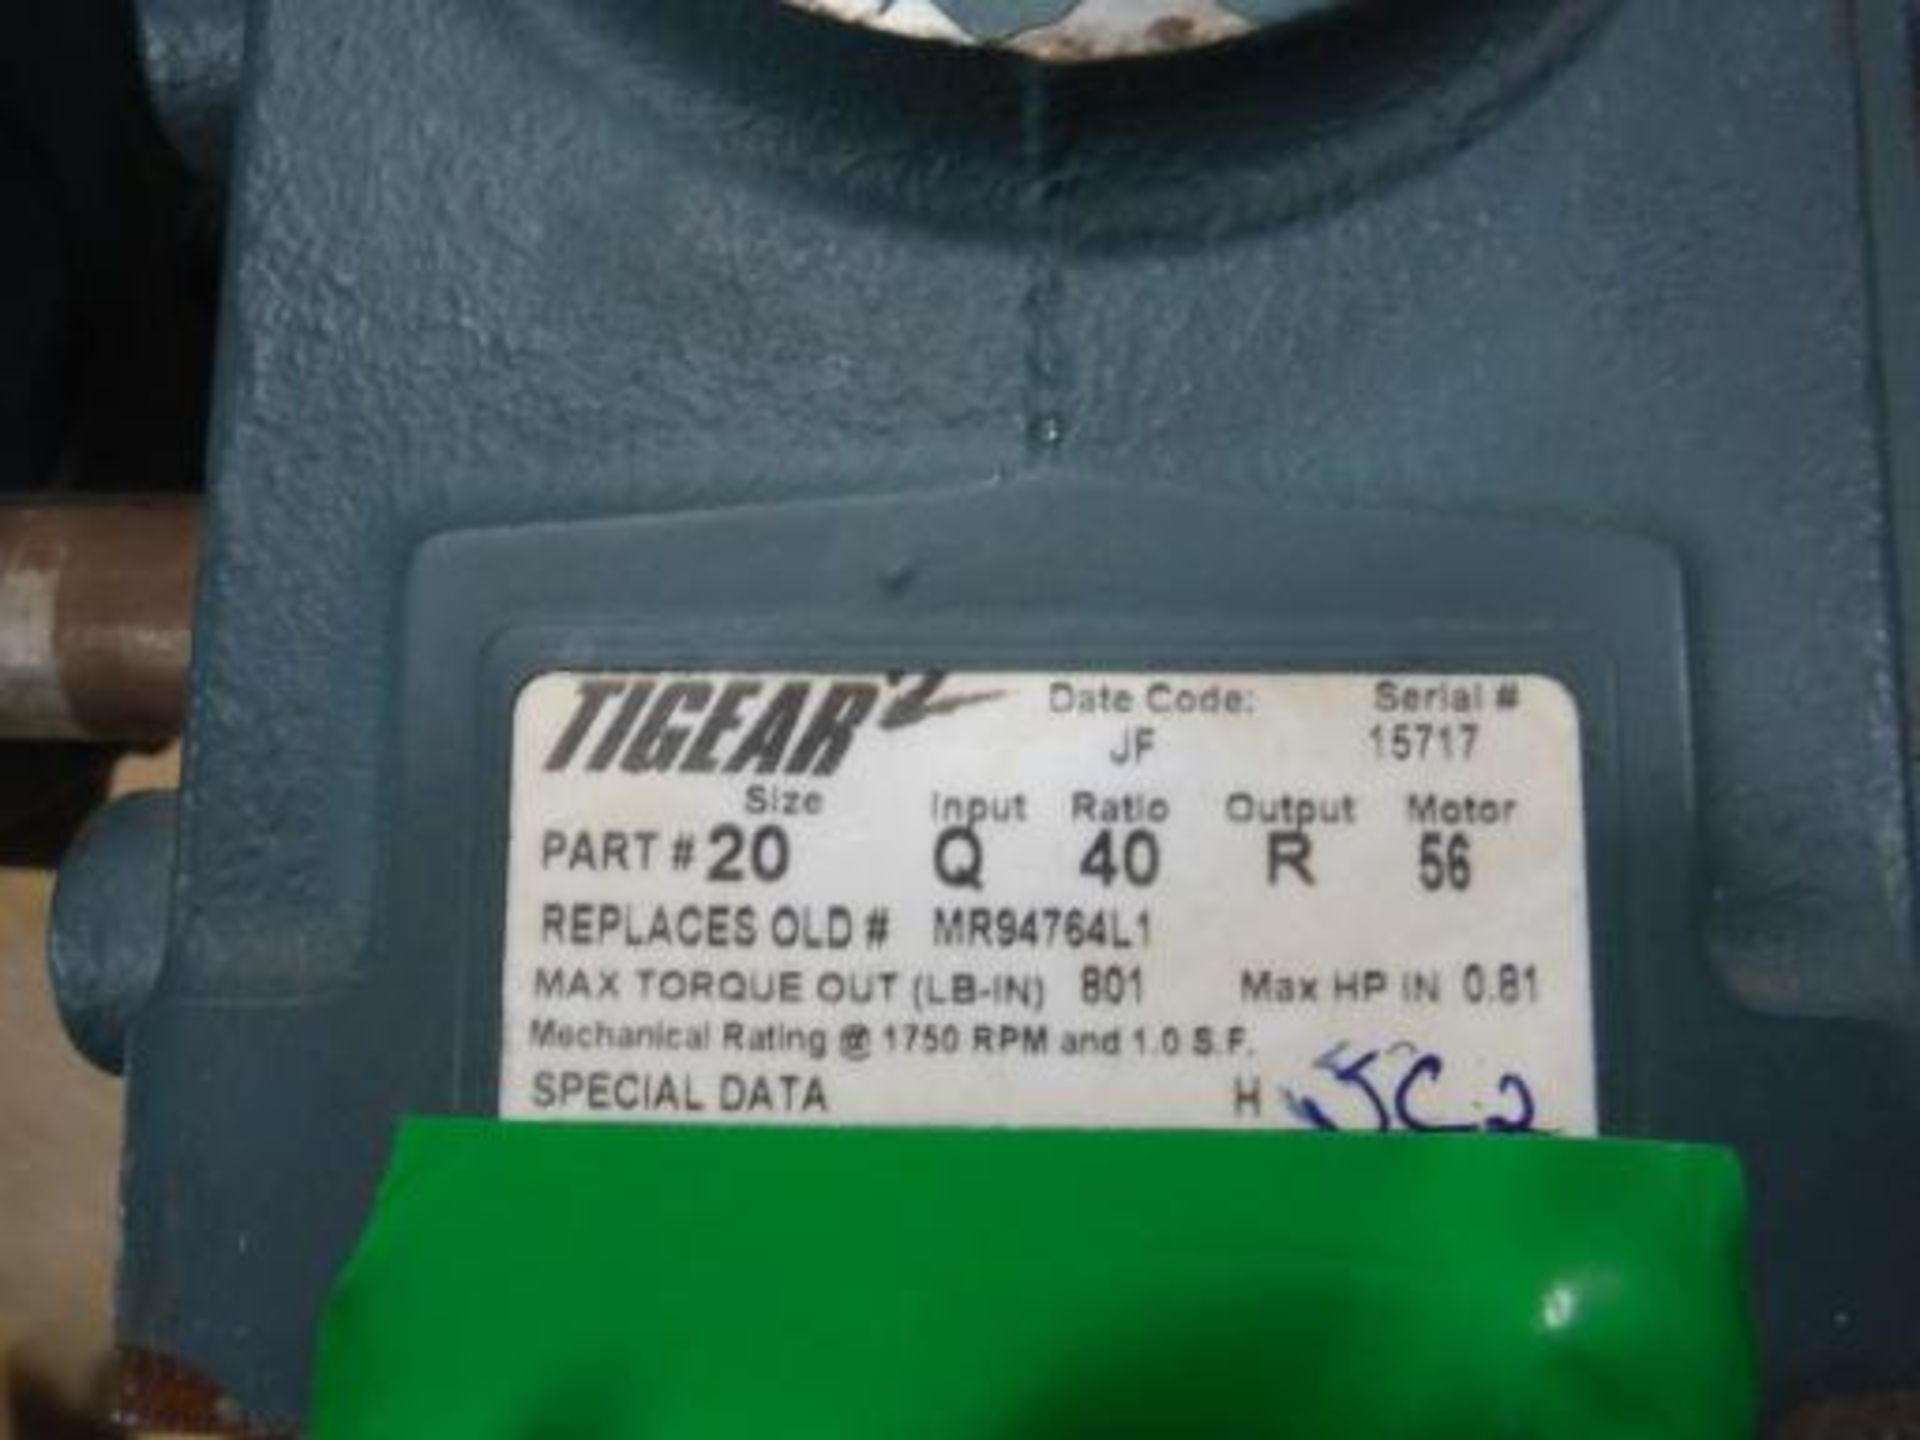 (2) NEW Dodge Tigear 2 Gear Box, Ratio: 40:1 (EACH). Located in Marion, Ohio Rigging Fee: $25 - Image 2 of 3